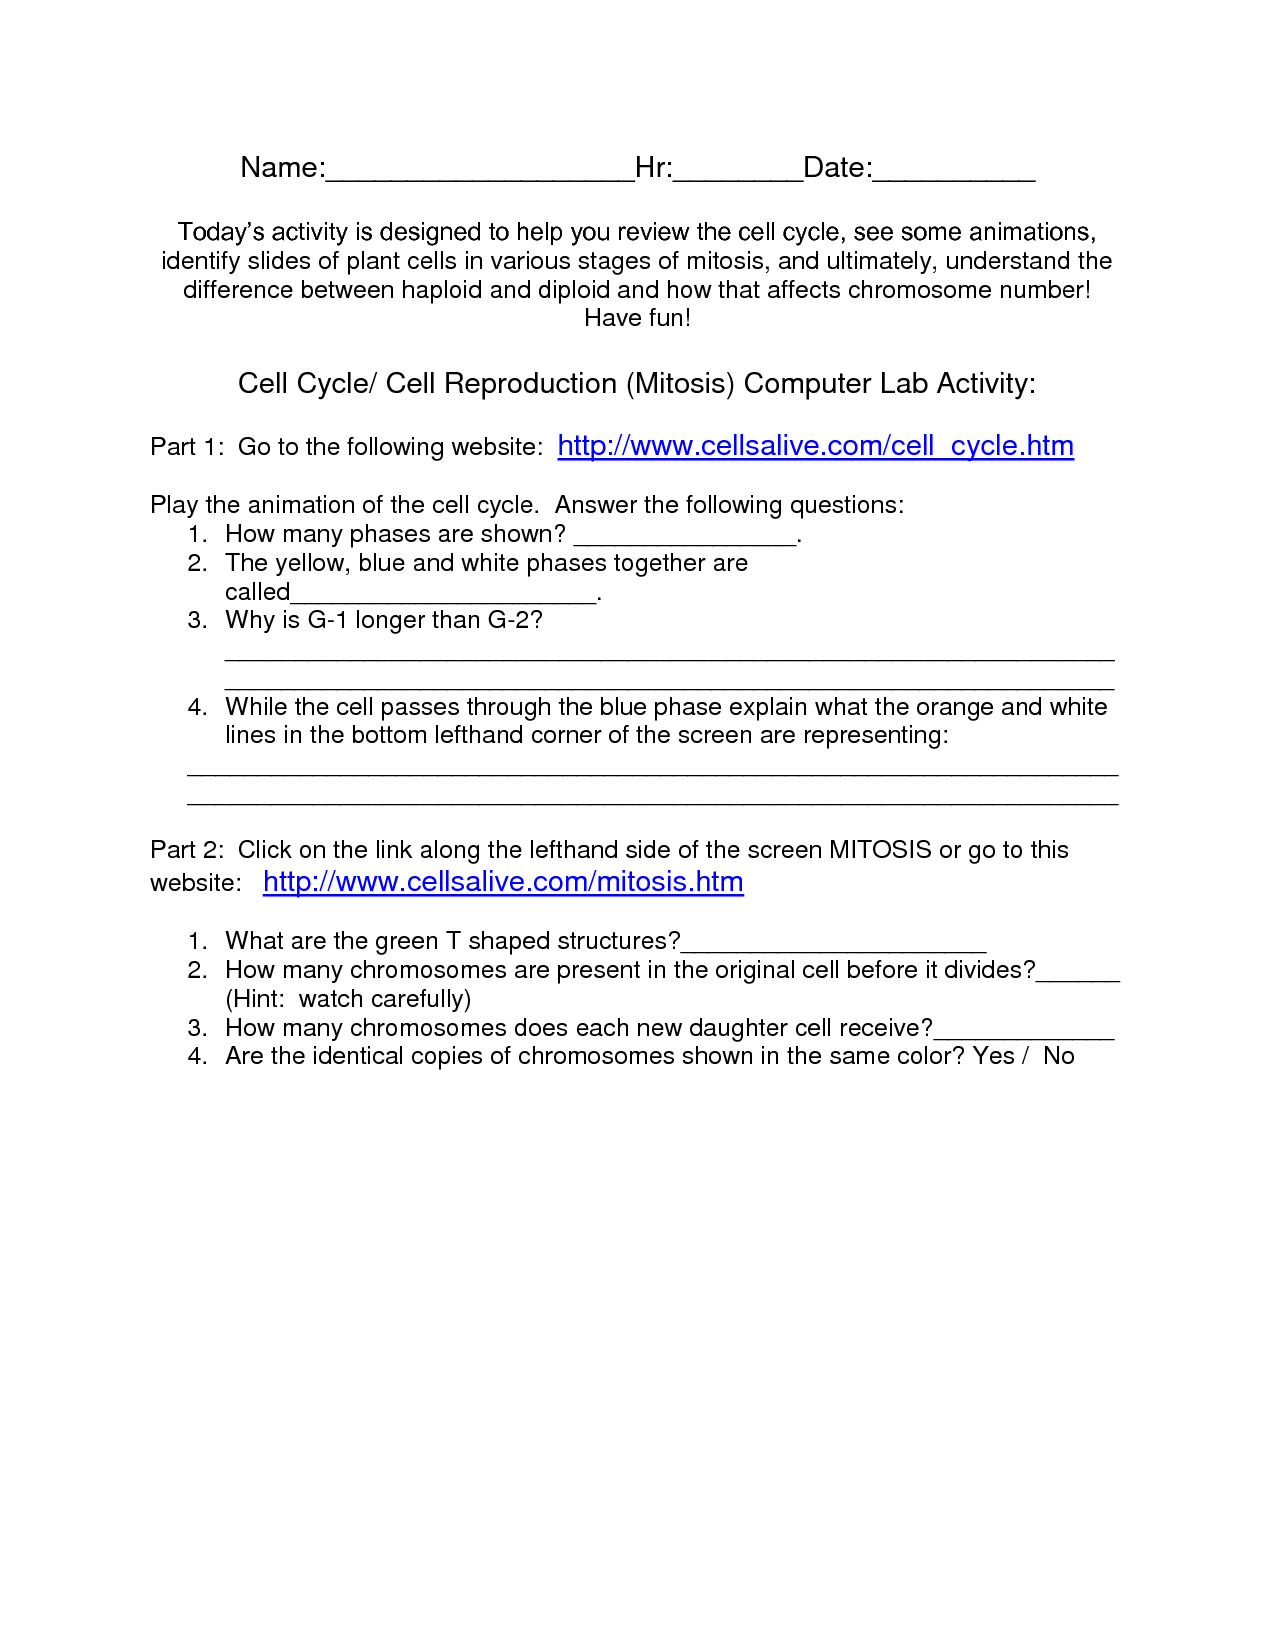 Cell Cycle and Mitosis Worksheet Answer Key